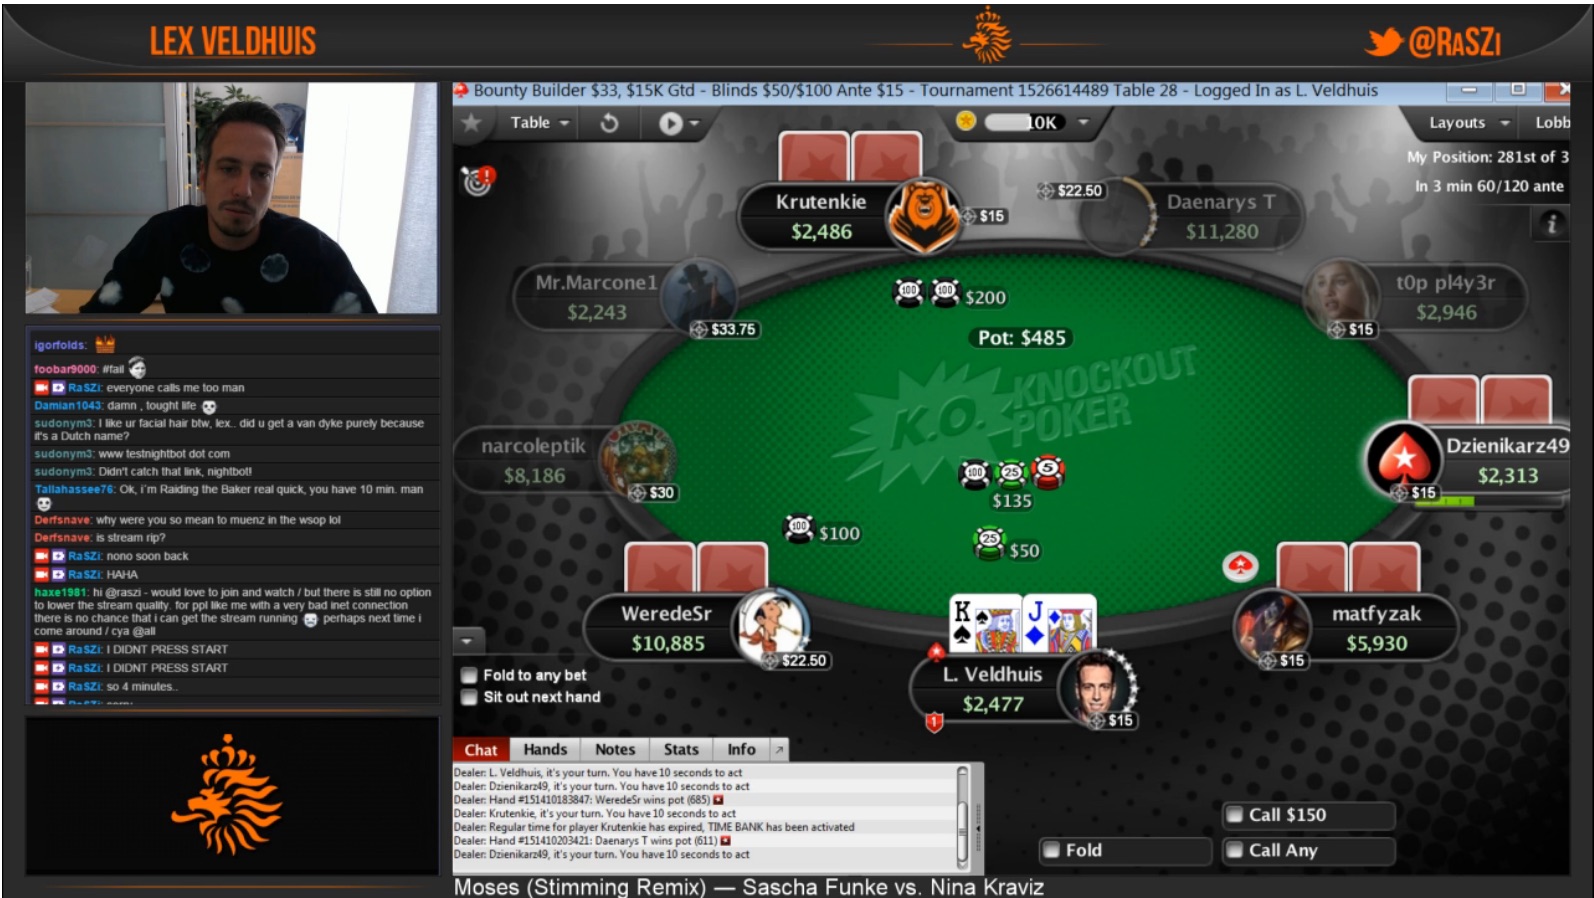 Twitch Leak Reveals What Top Poker Players Earn from Streaming